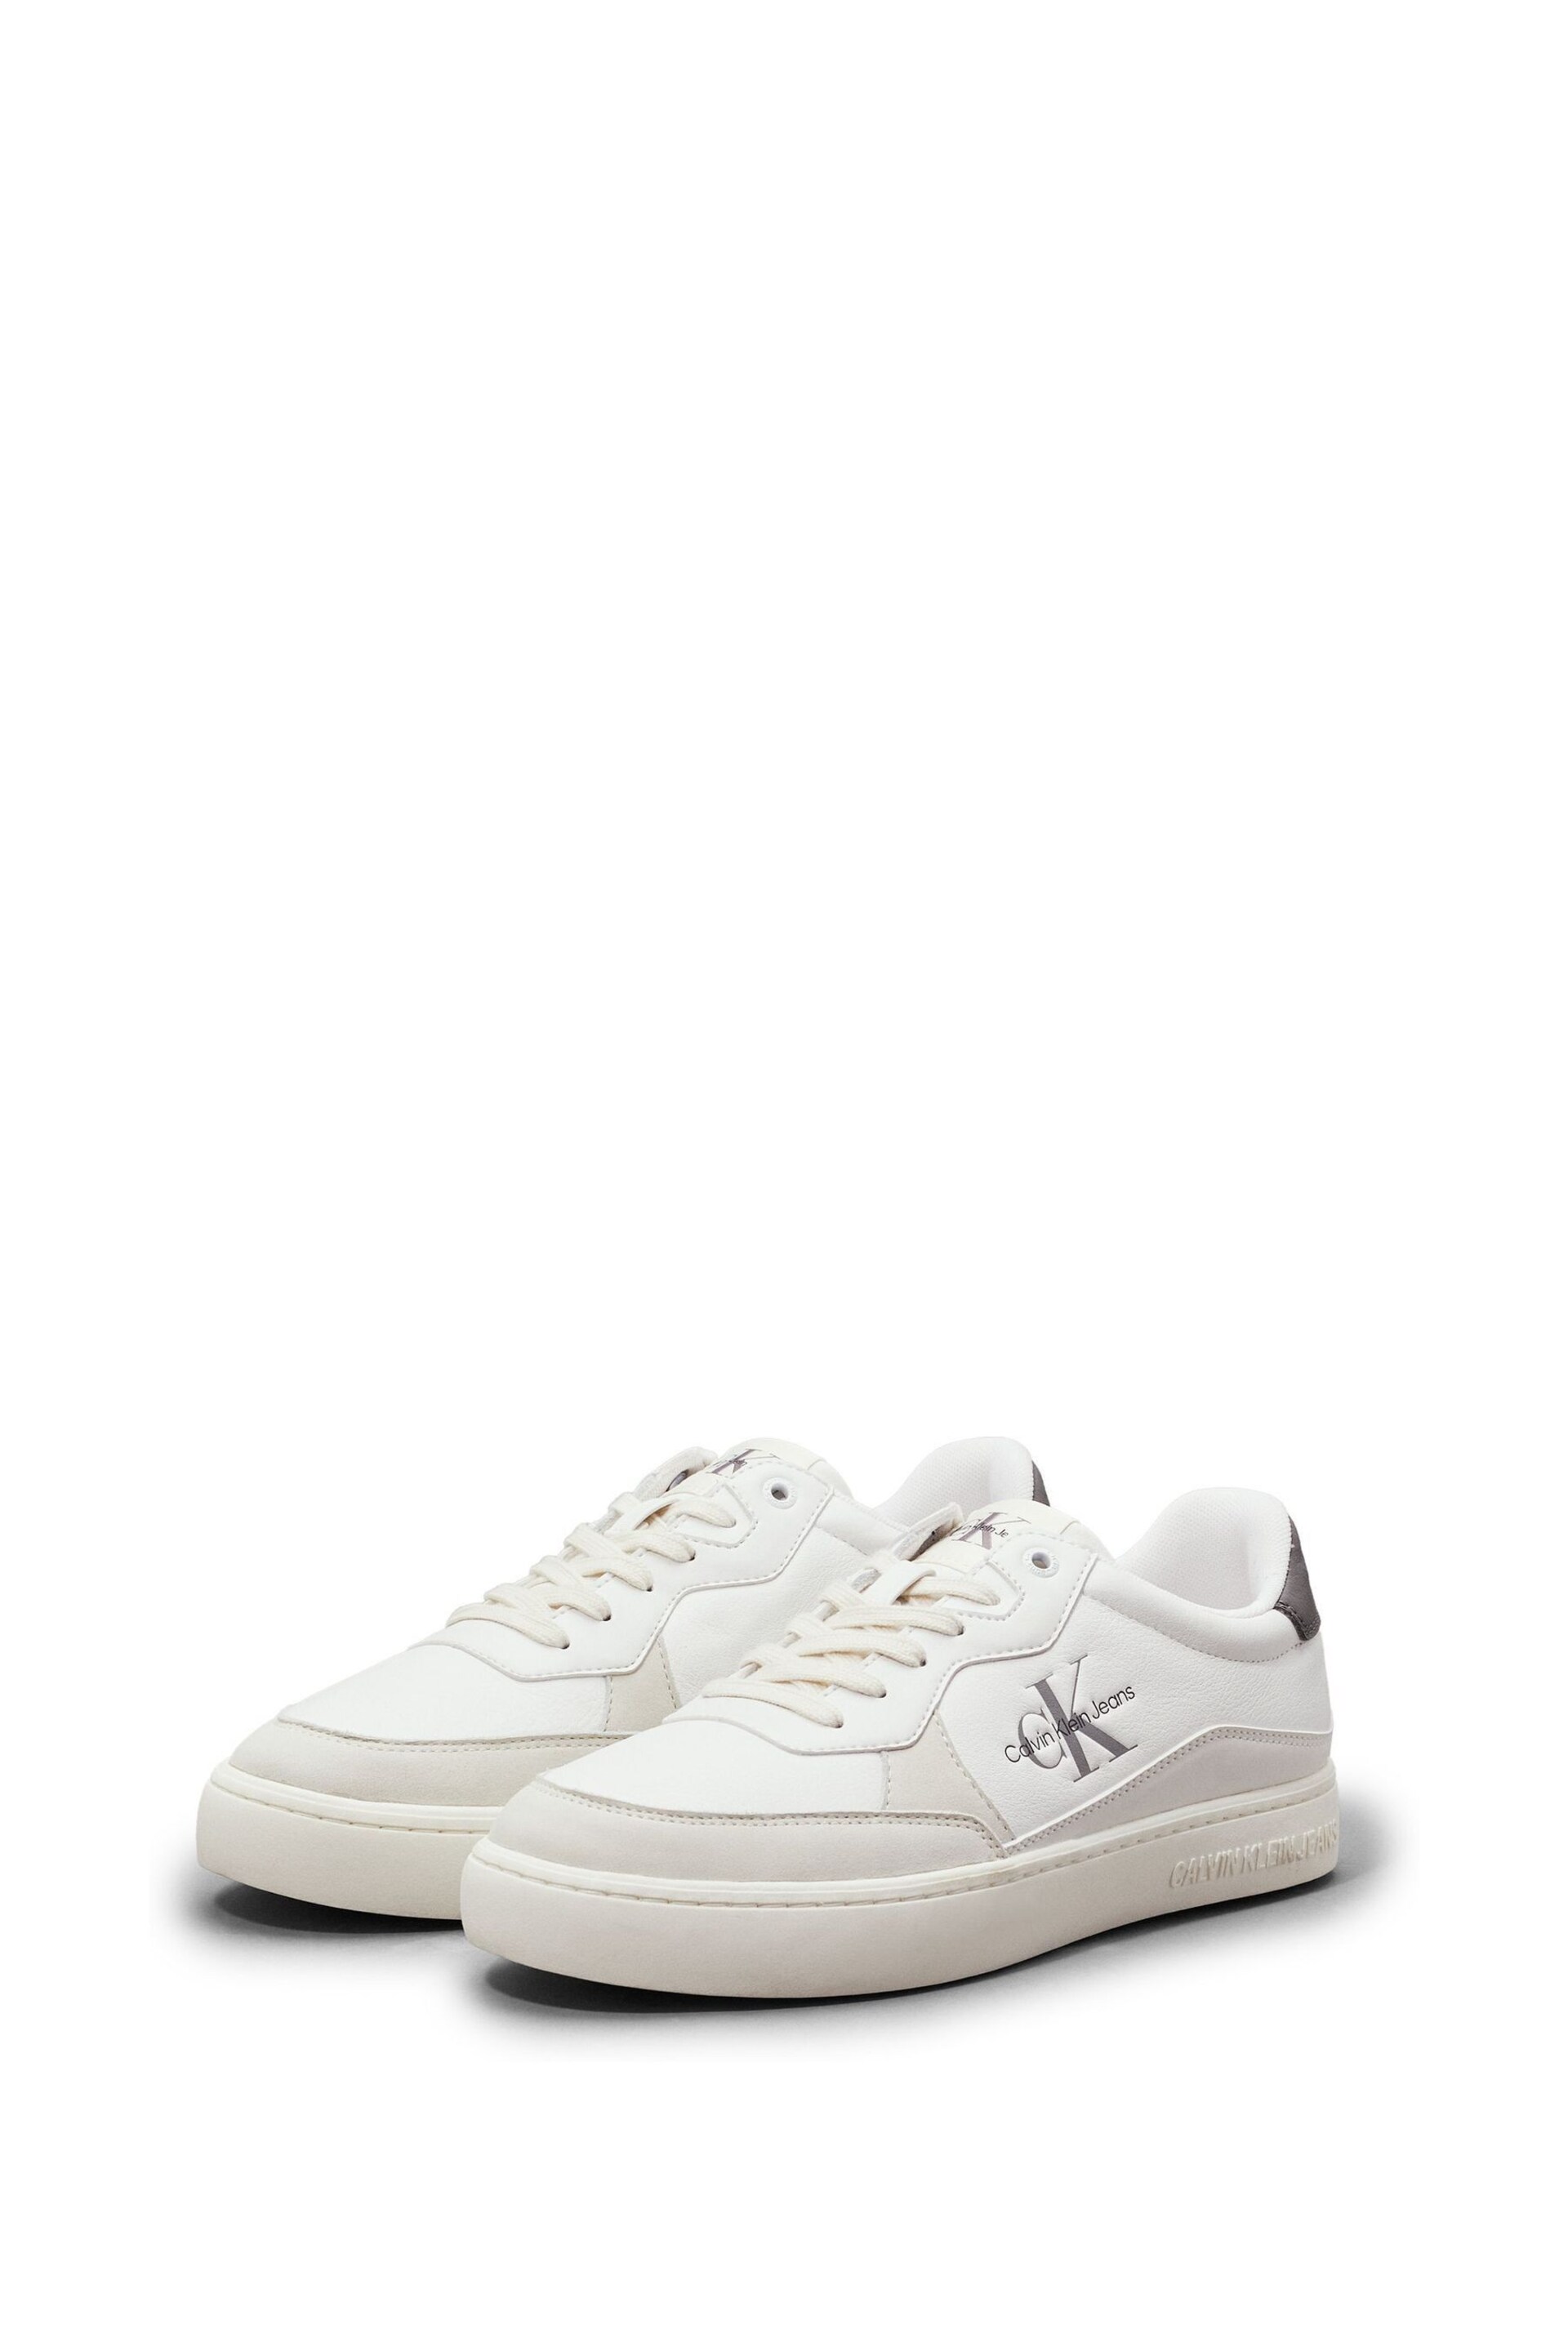 Calvin Klein Grey Classic Cupsole Low Lace-Up Trainers - Image 3 of 5